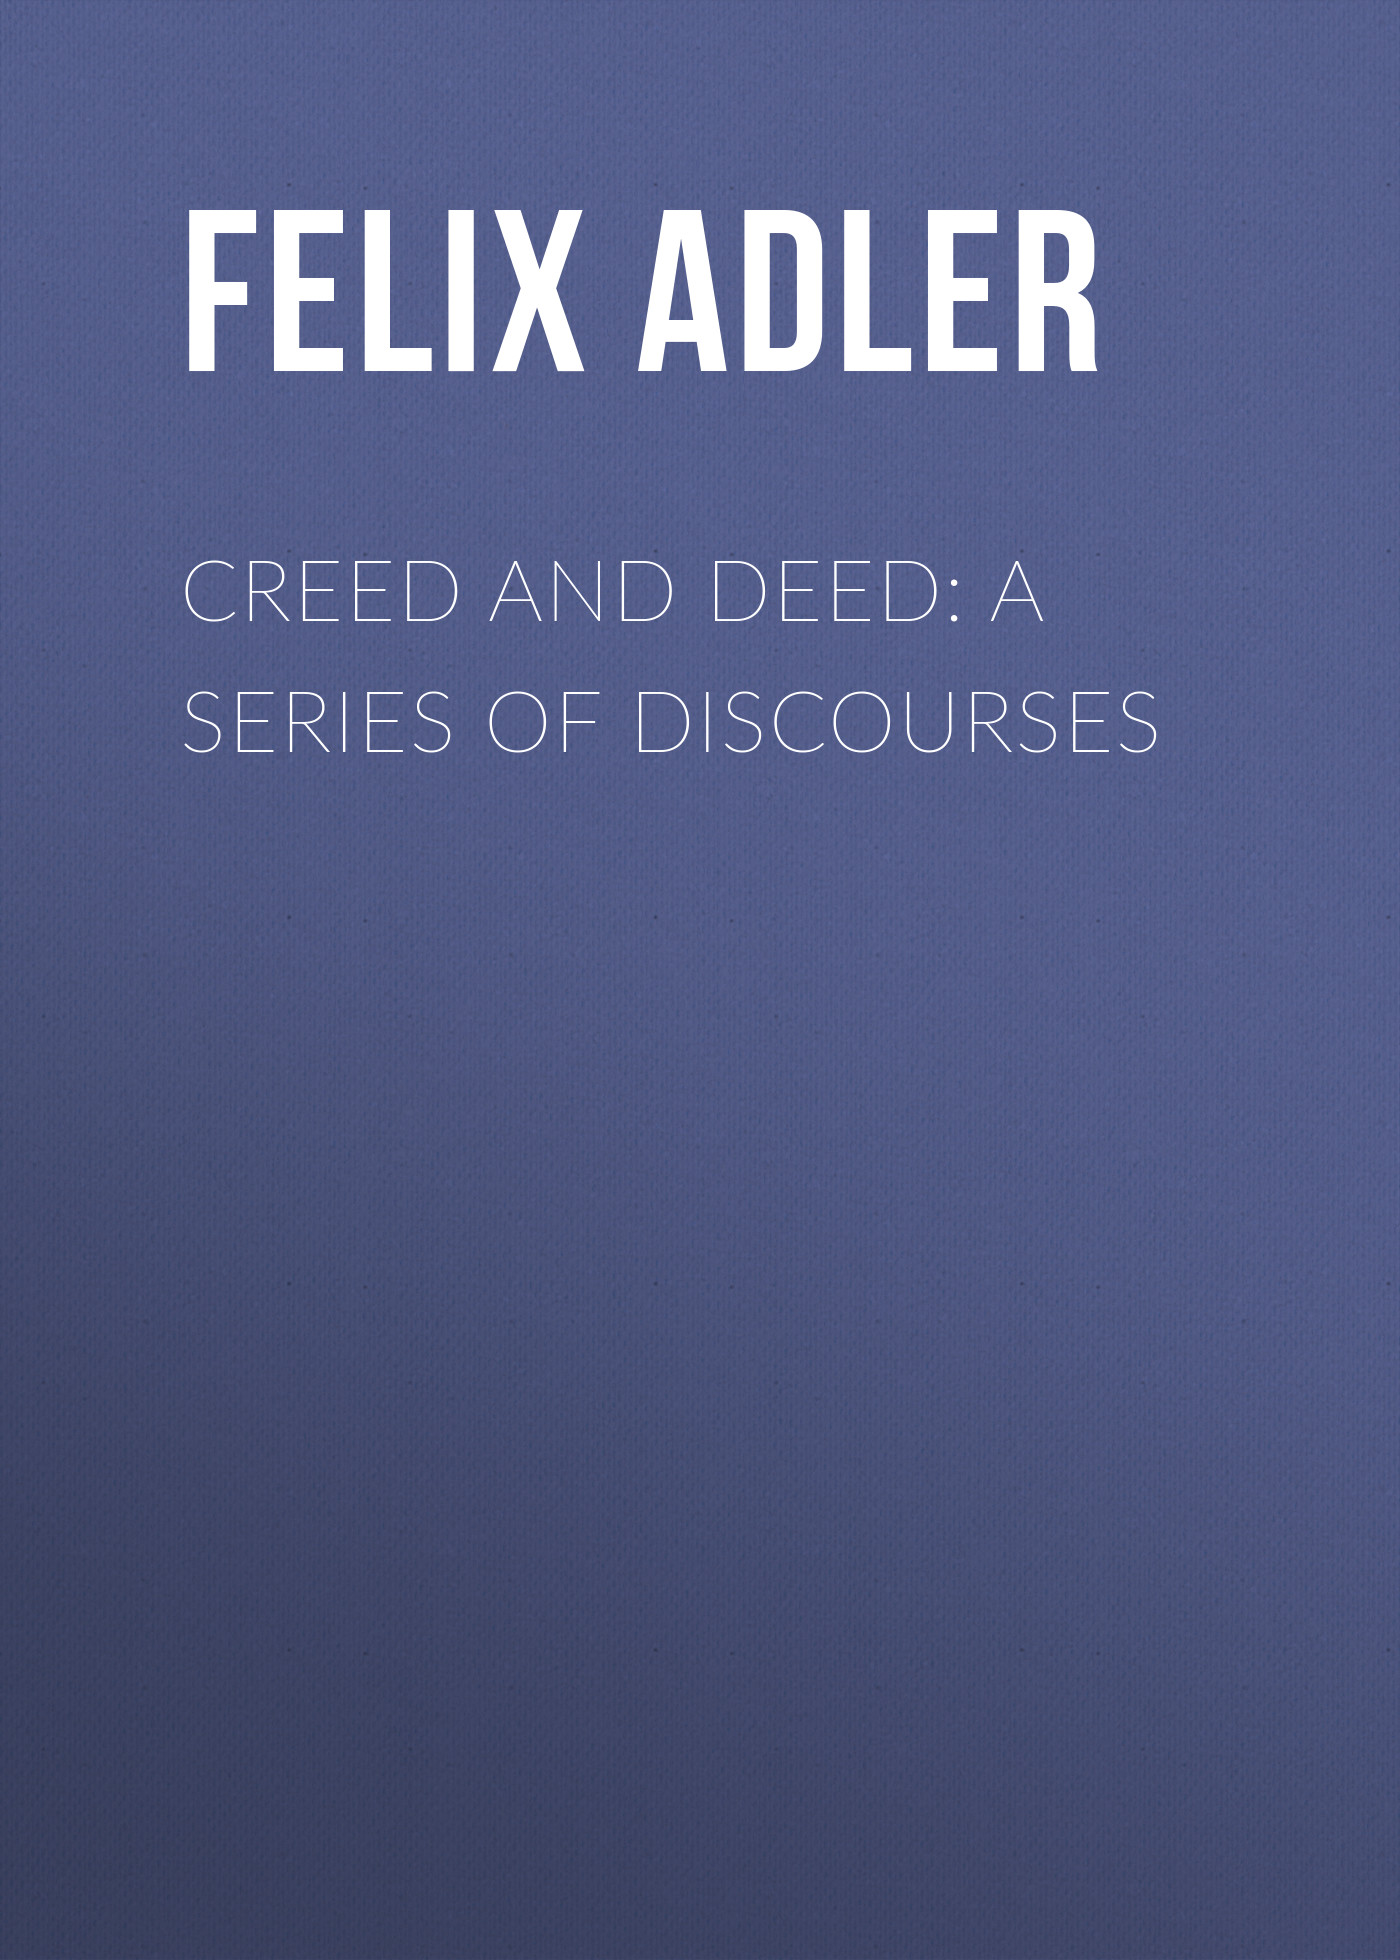 Creed and Deed: A Series of Discourses